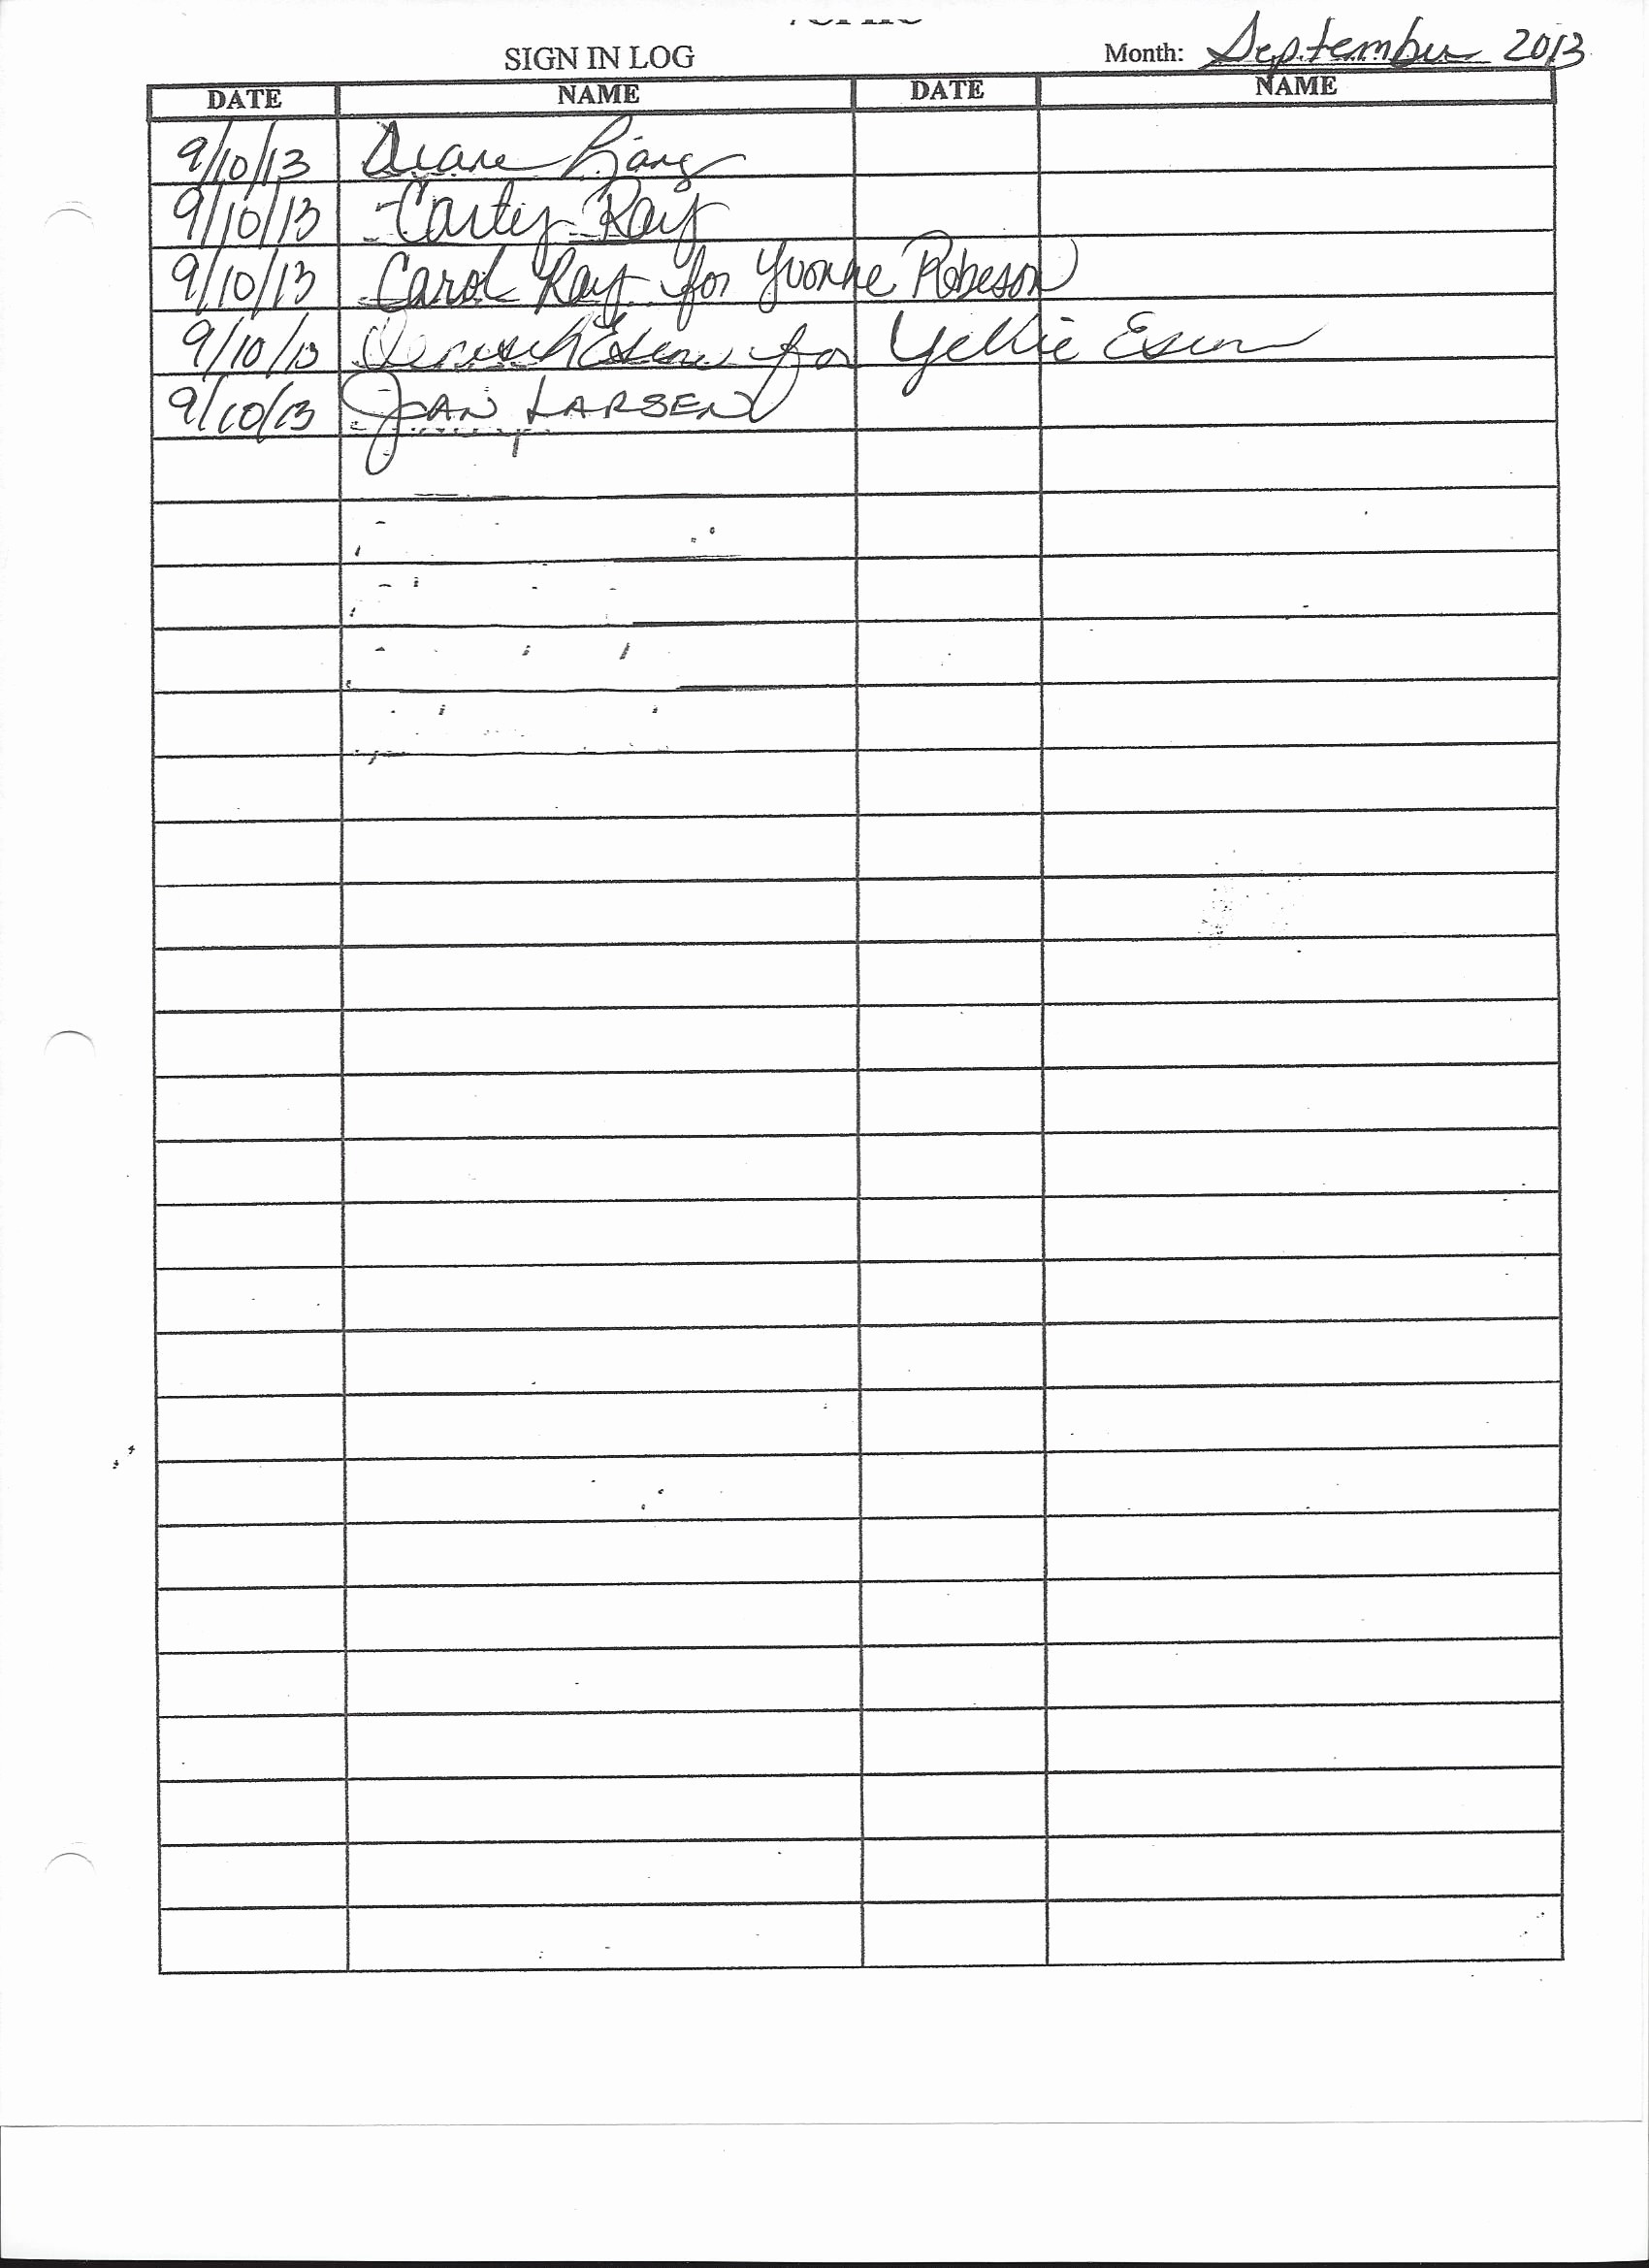 Safety Meeting Sign Off Sheet Luxury Safety Meeting Sign Off Sheet Evolist